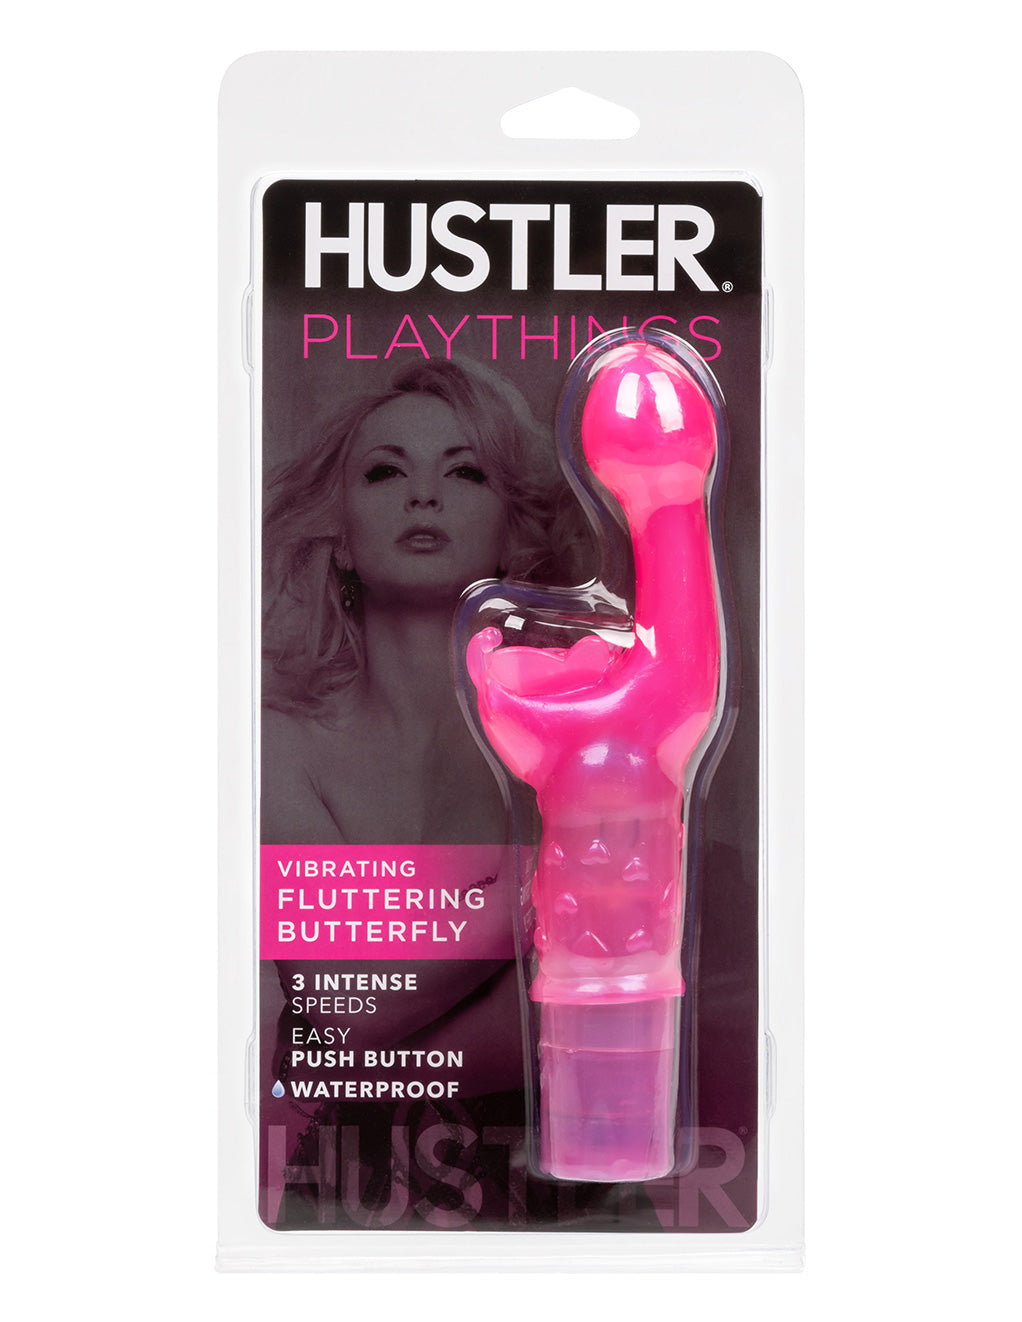 Hustler® Playthings Flutter Butterfly Dual Stimulation Vibrator- Front package